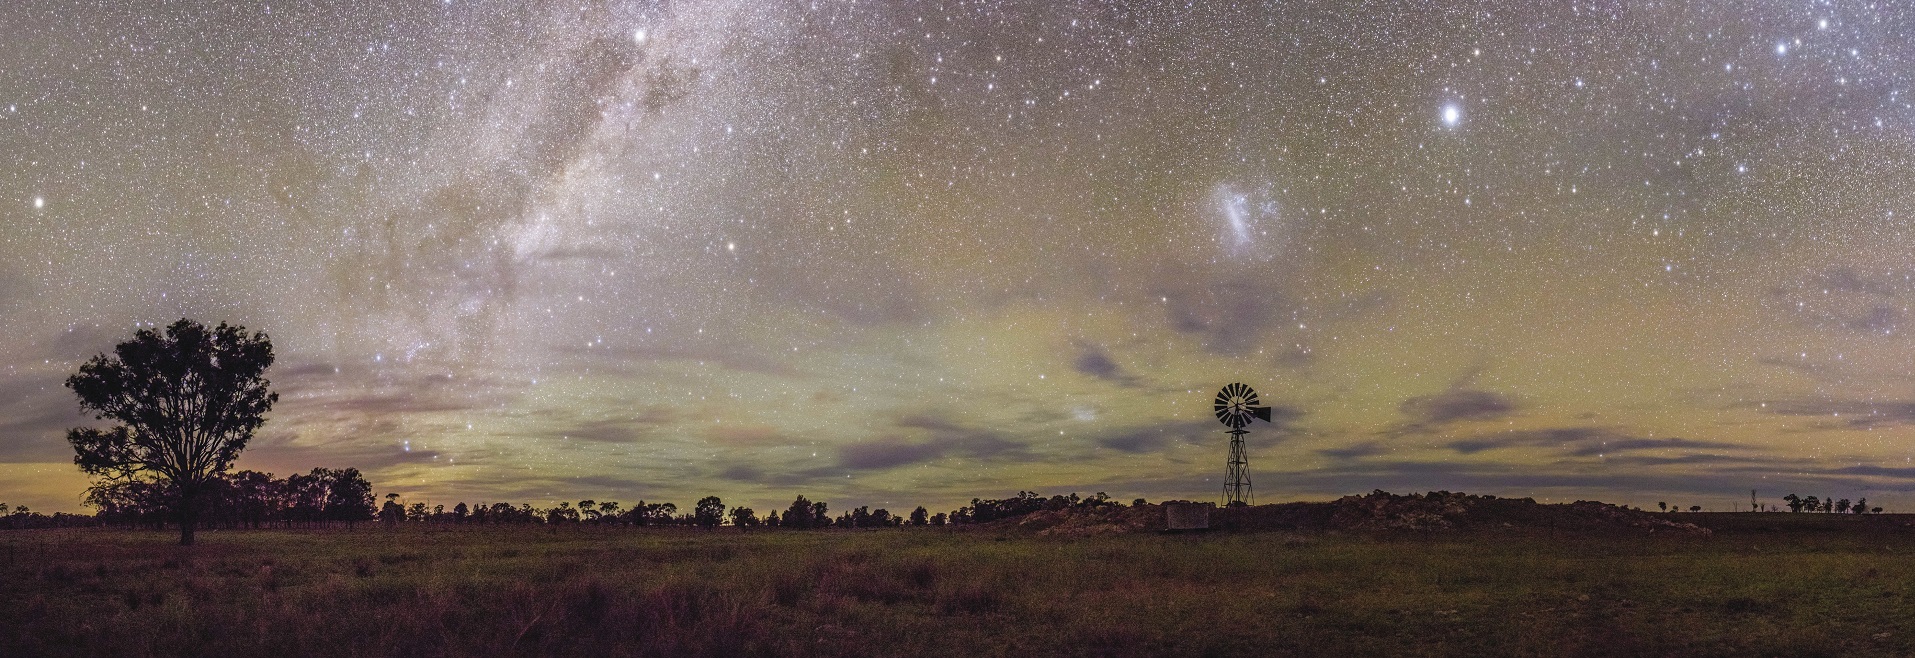 Sleeping Under the Stars in the Outback